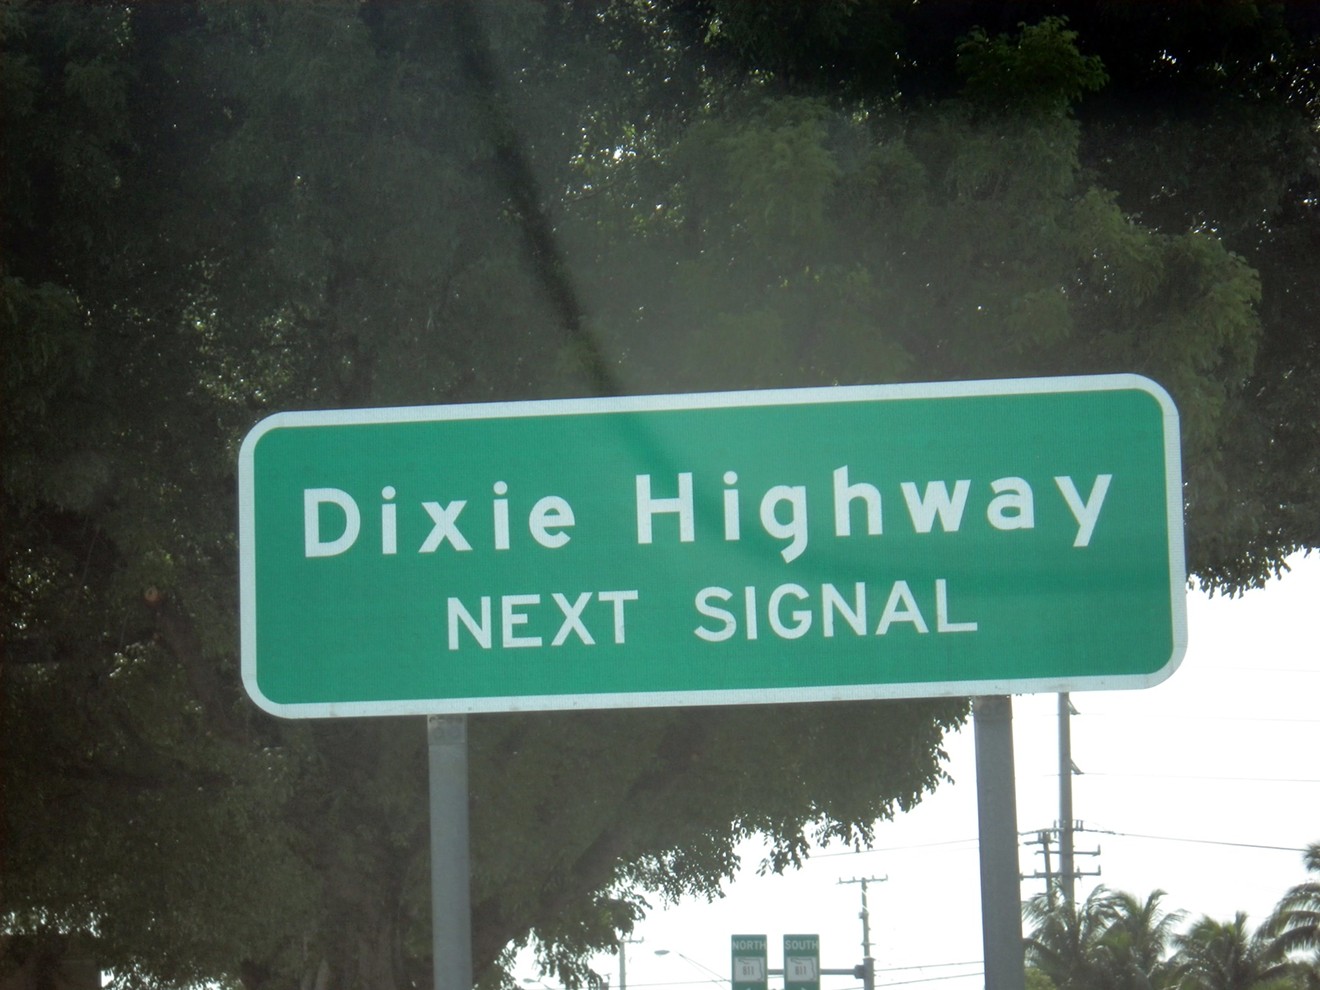 The song "Dixie" became the de facto anthem of the Confederacy.